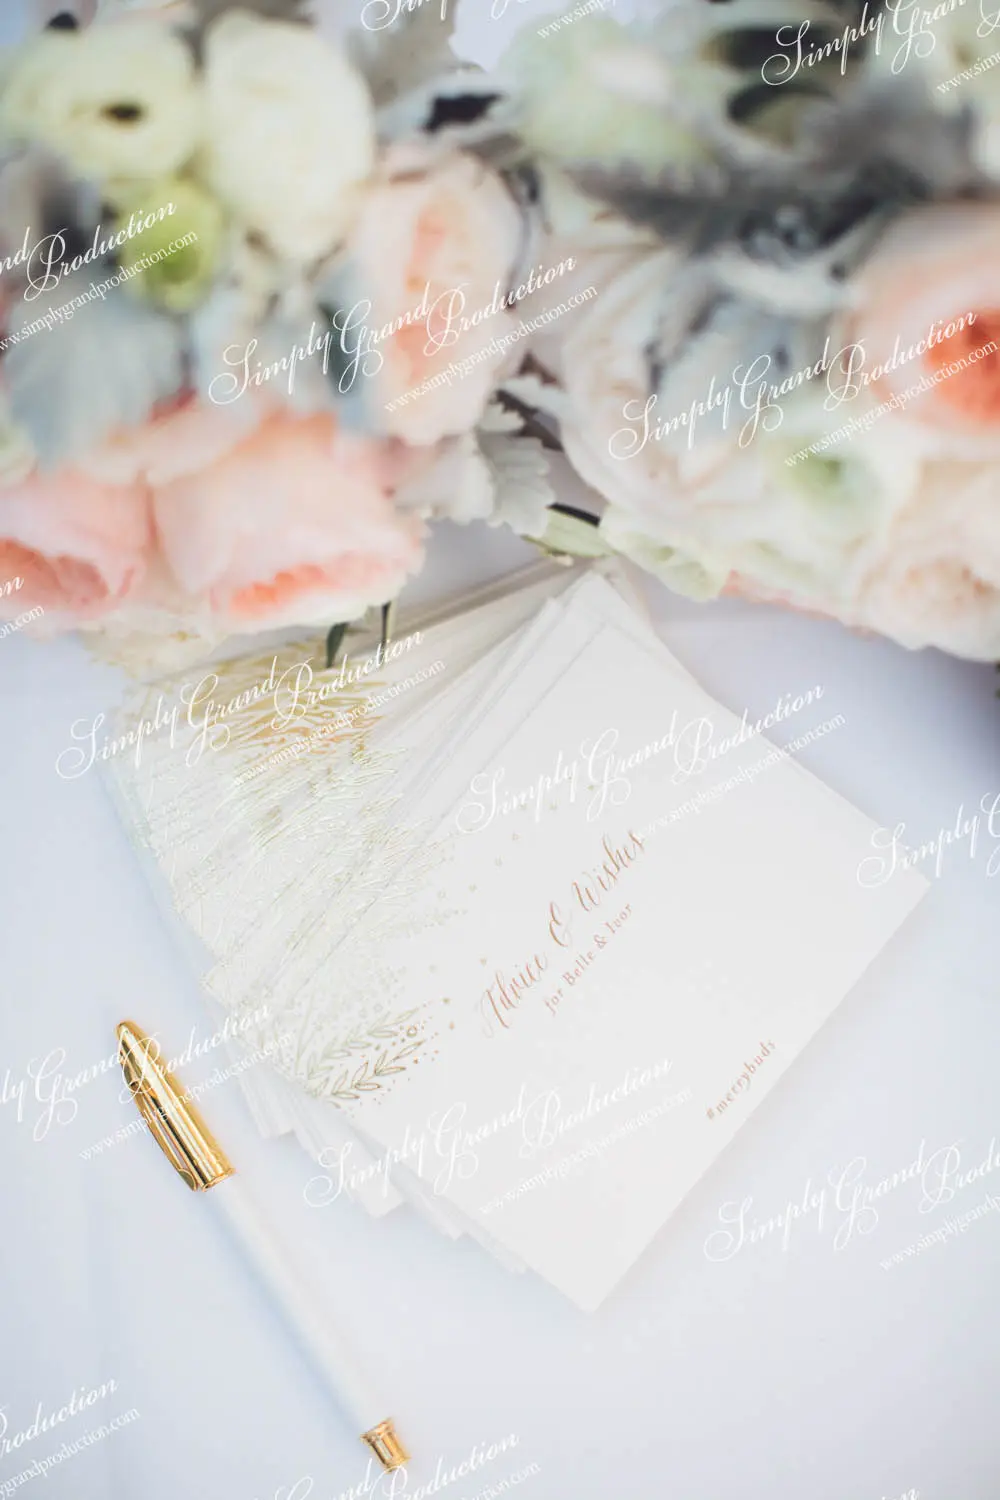 Simply_Grand_Production_Outdoor_wedding_decoration_stationery_Repulse_Bay_1_12.jpg